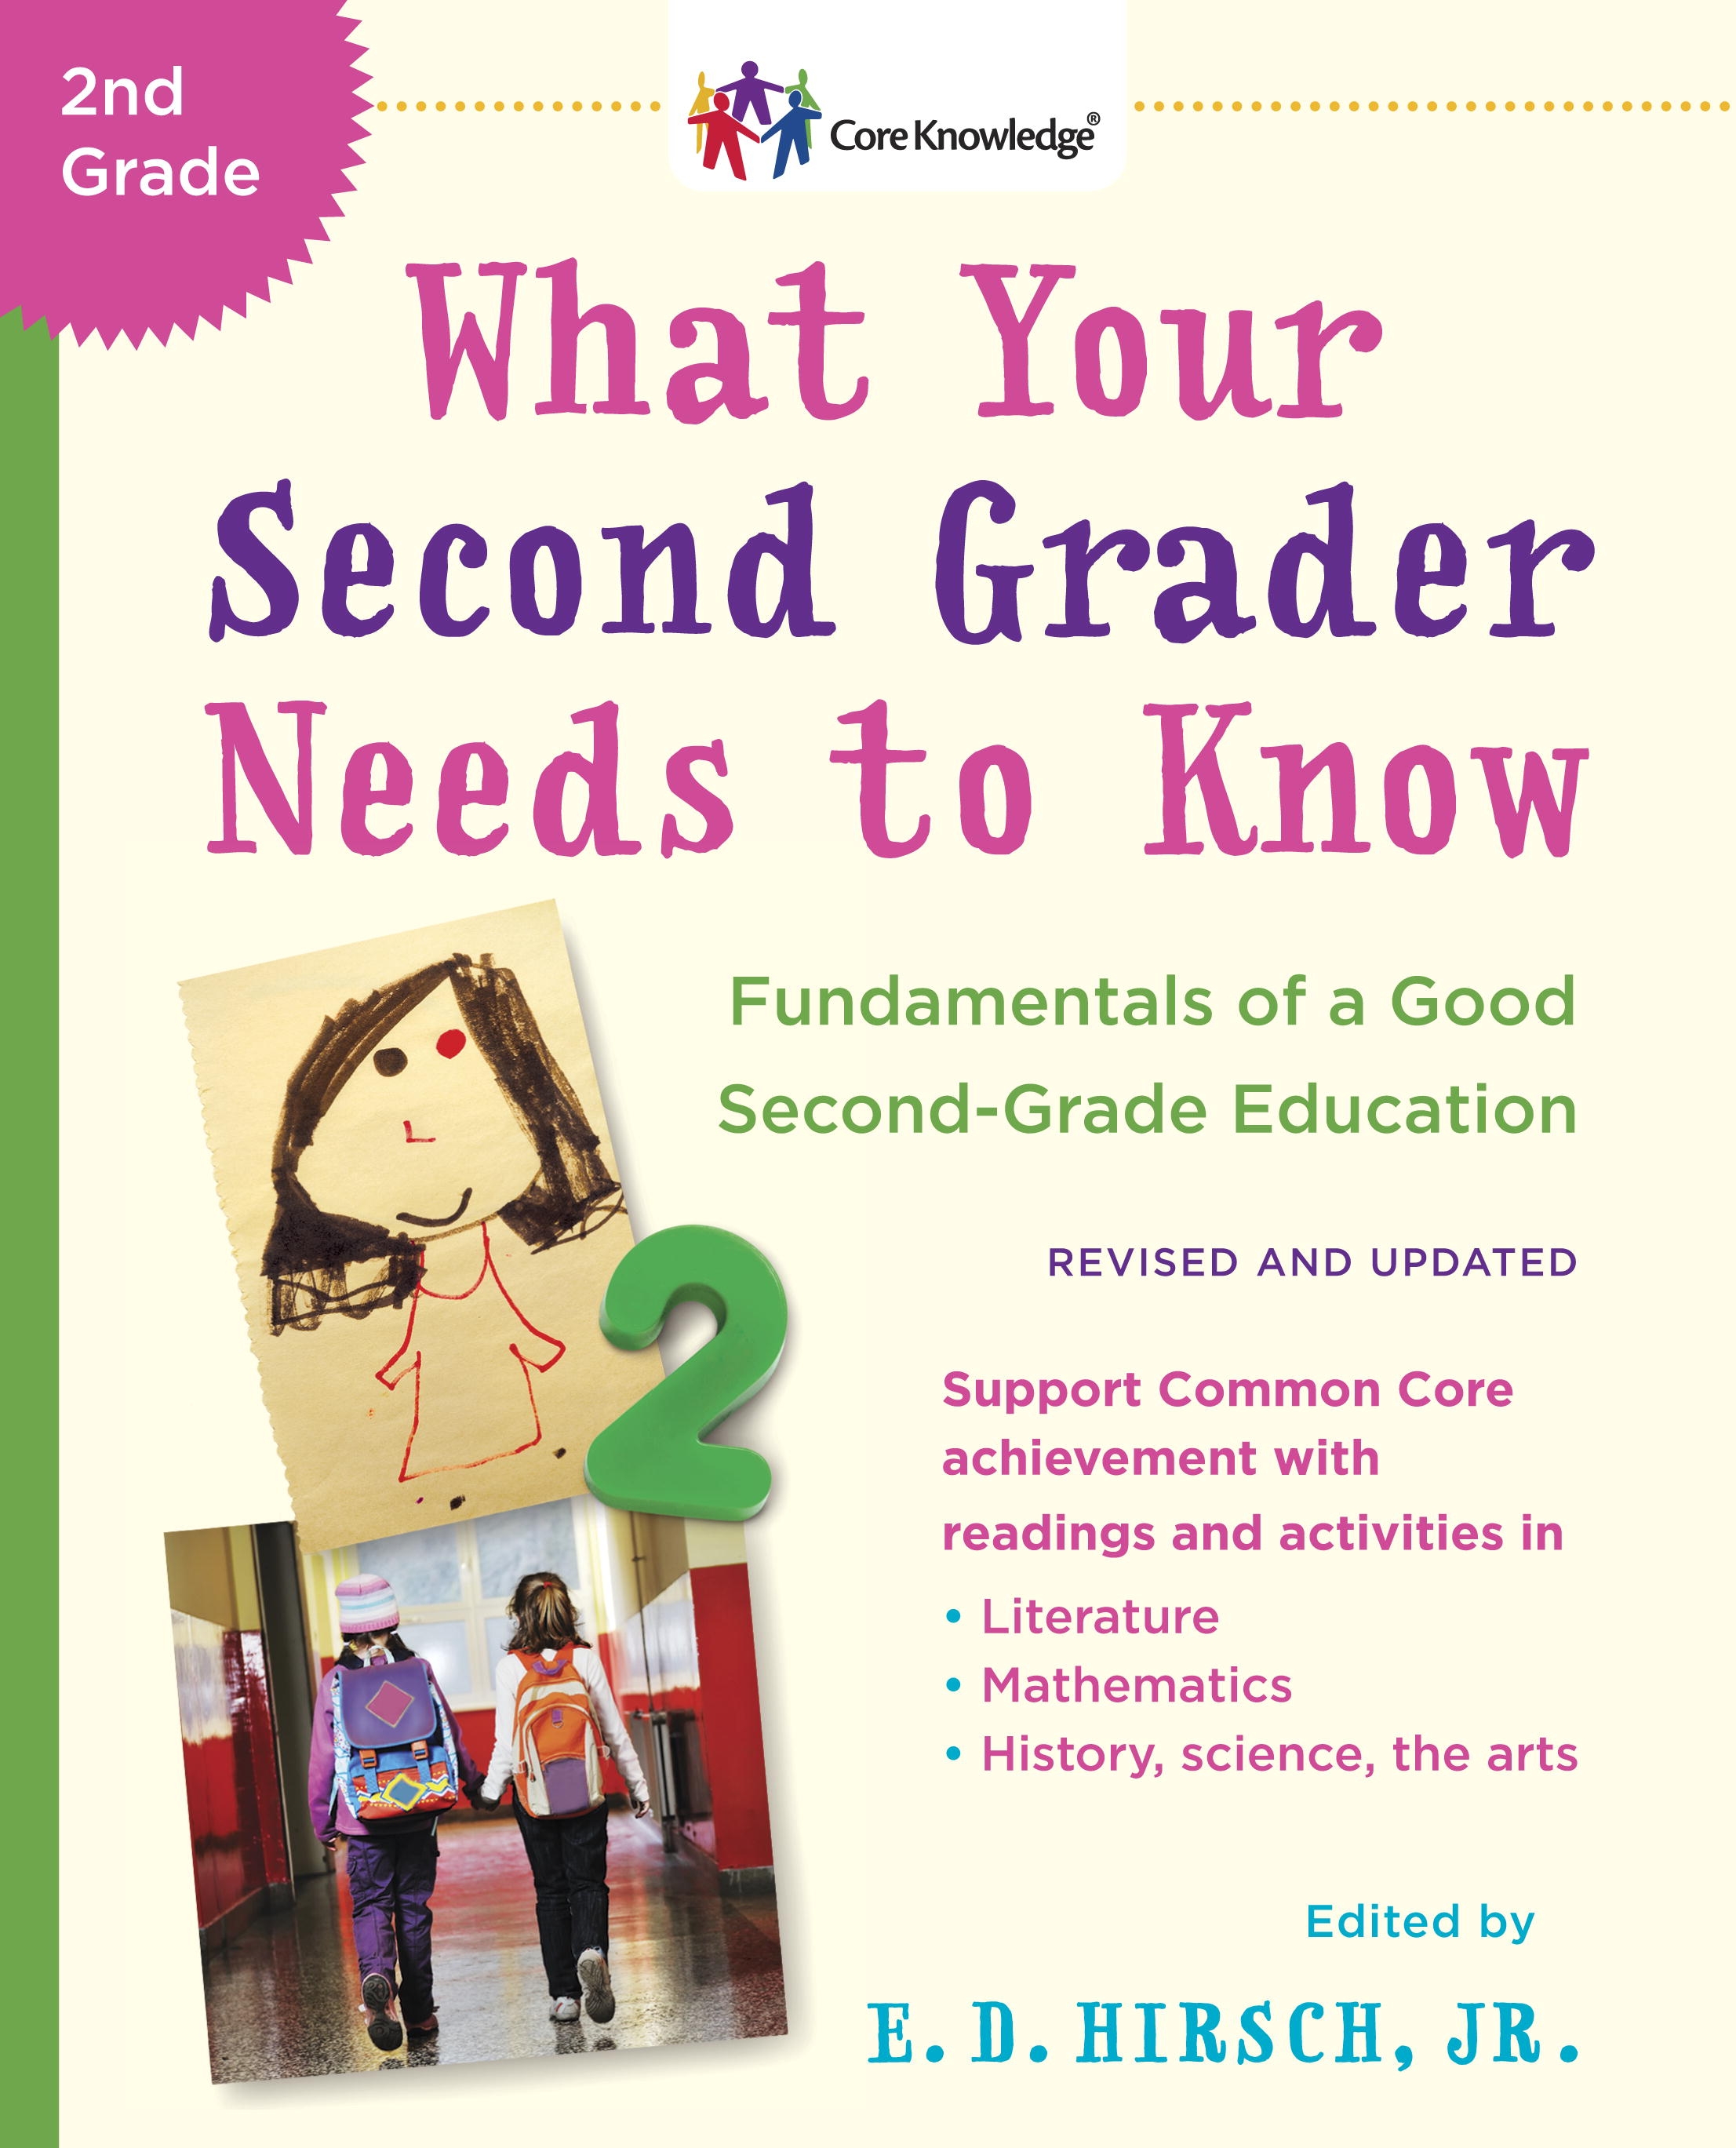 what-your-second-grader-needs-to-know-revised-and-updated-by-e-d-hirsch-jr-penguin-books